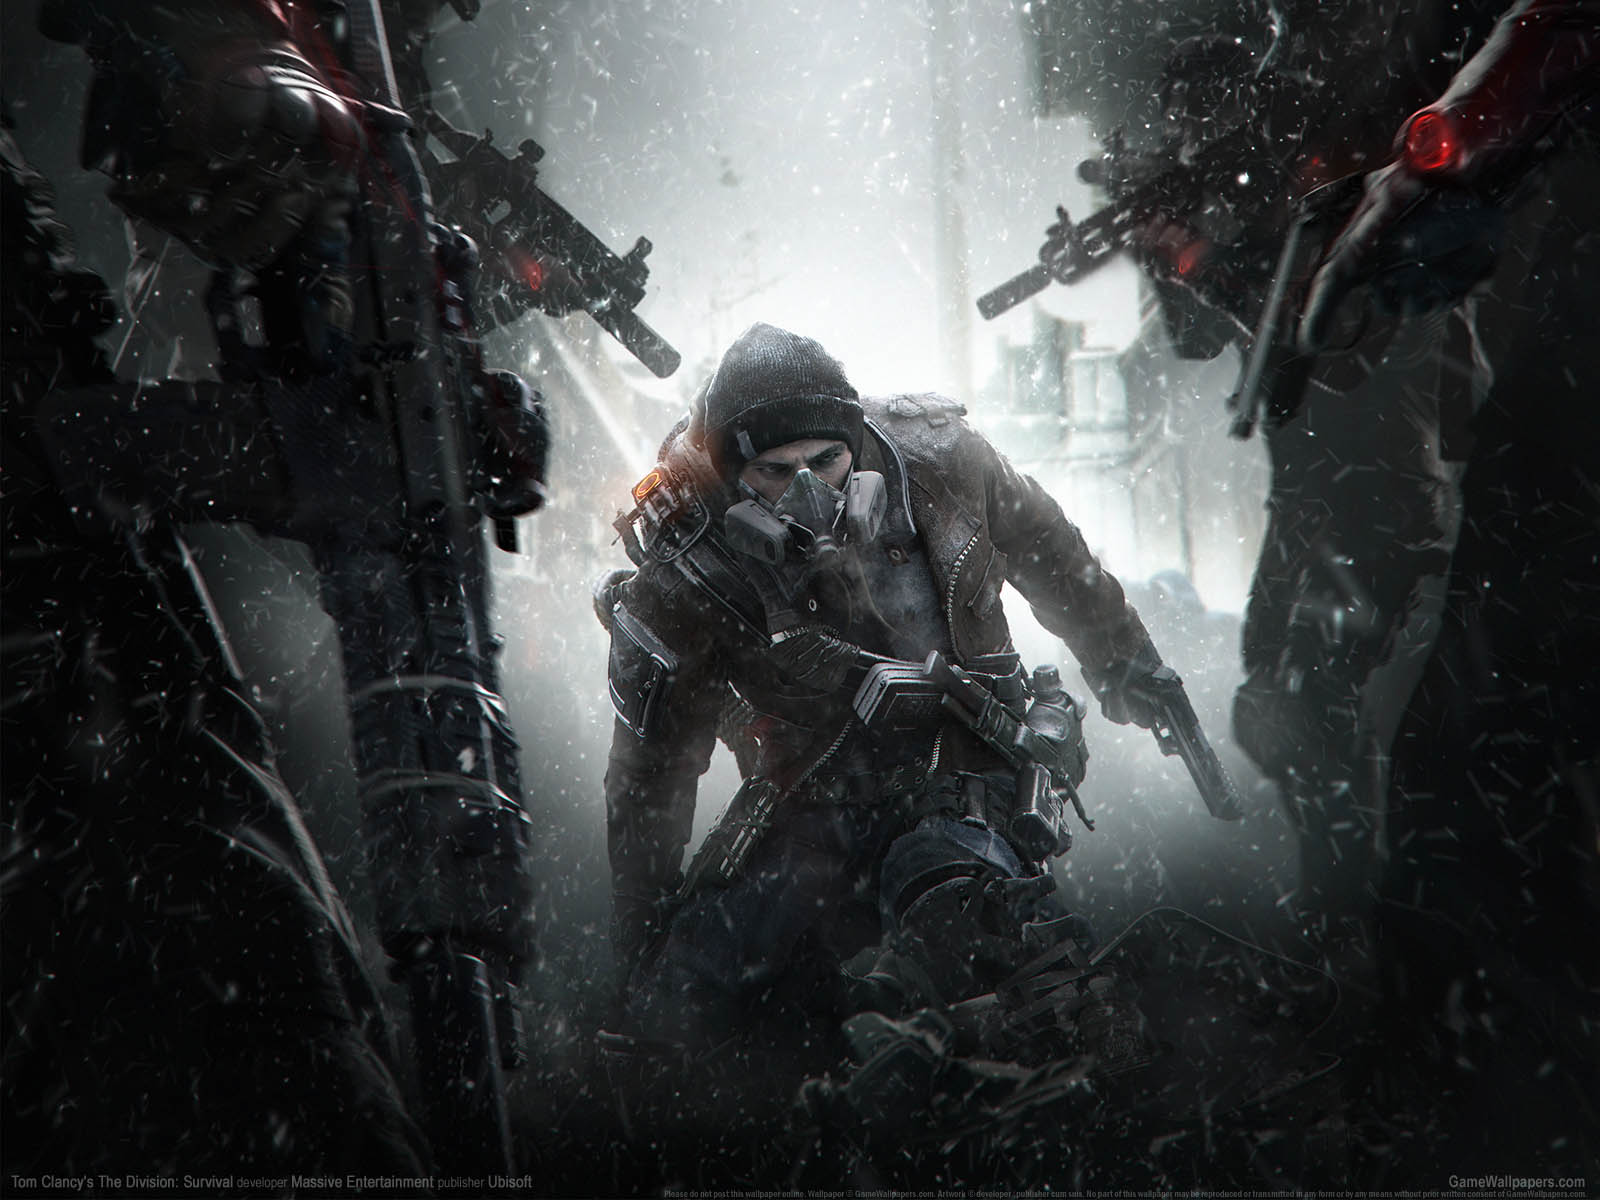 Tom Clancy's The Division: Survivalνmmer=01 achtergrond  1600x1200